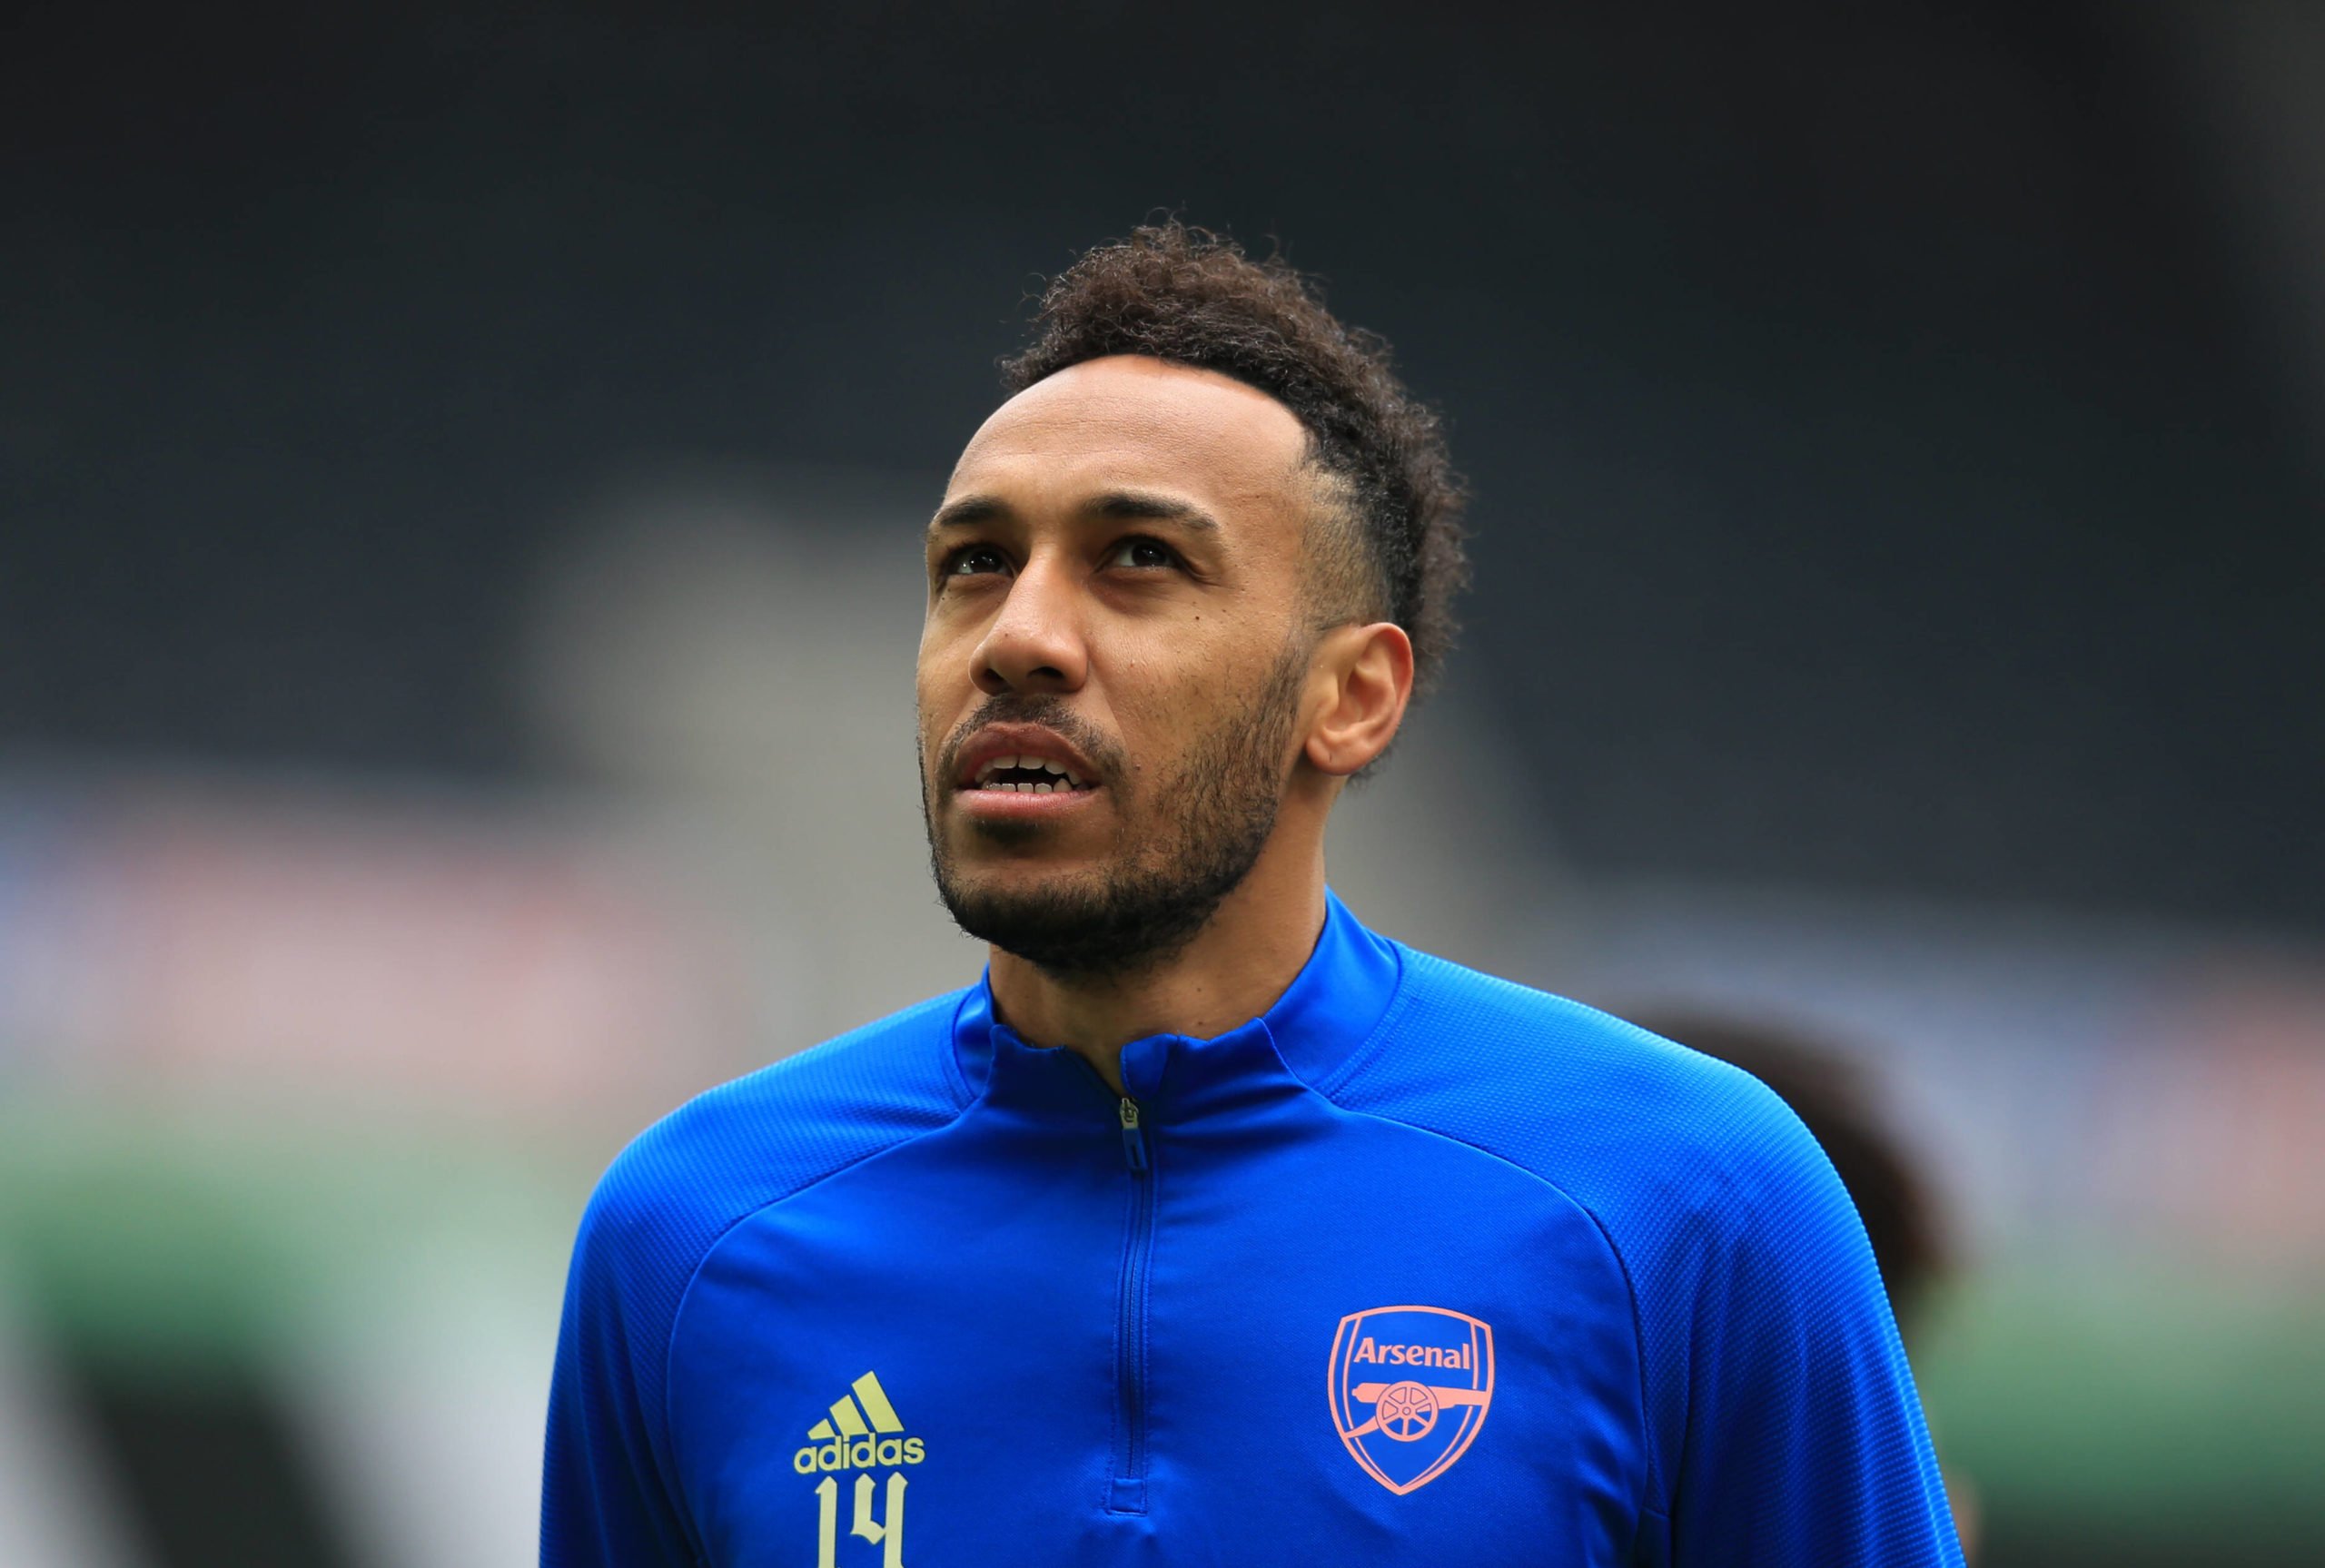 Manchester City could move in for Aubameyang who is seen in the picture